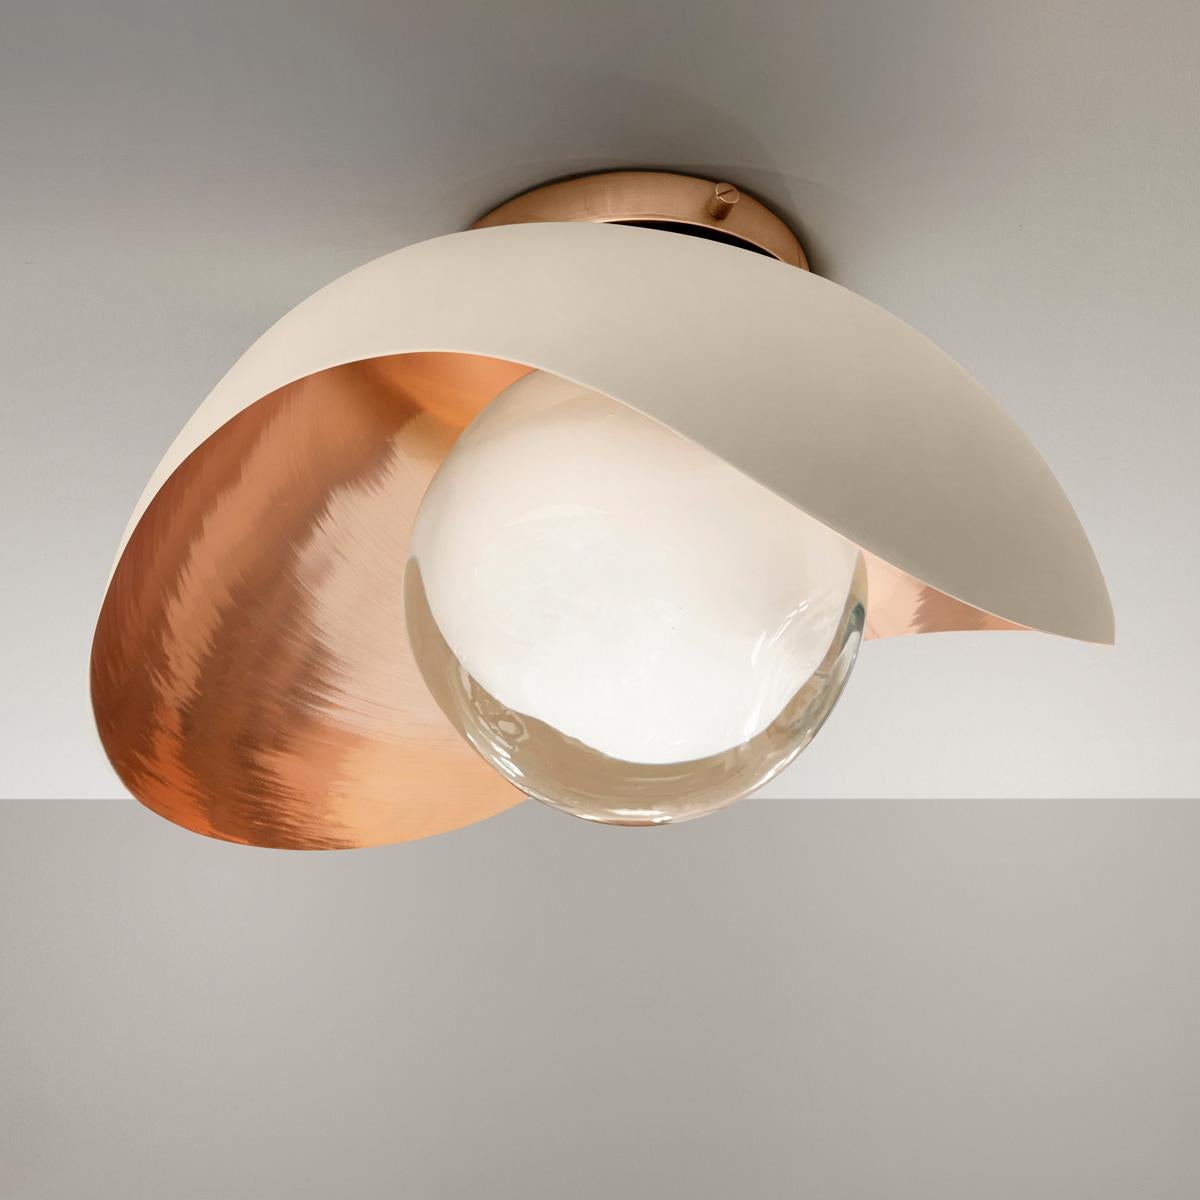 The Perla flushmount features an organic brass shell nestling our Sfera glass handblown in Tuscany. The first images show the fixture with a polished copper interior and sand white exterior finish-subsequent pictures show it in a selection of